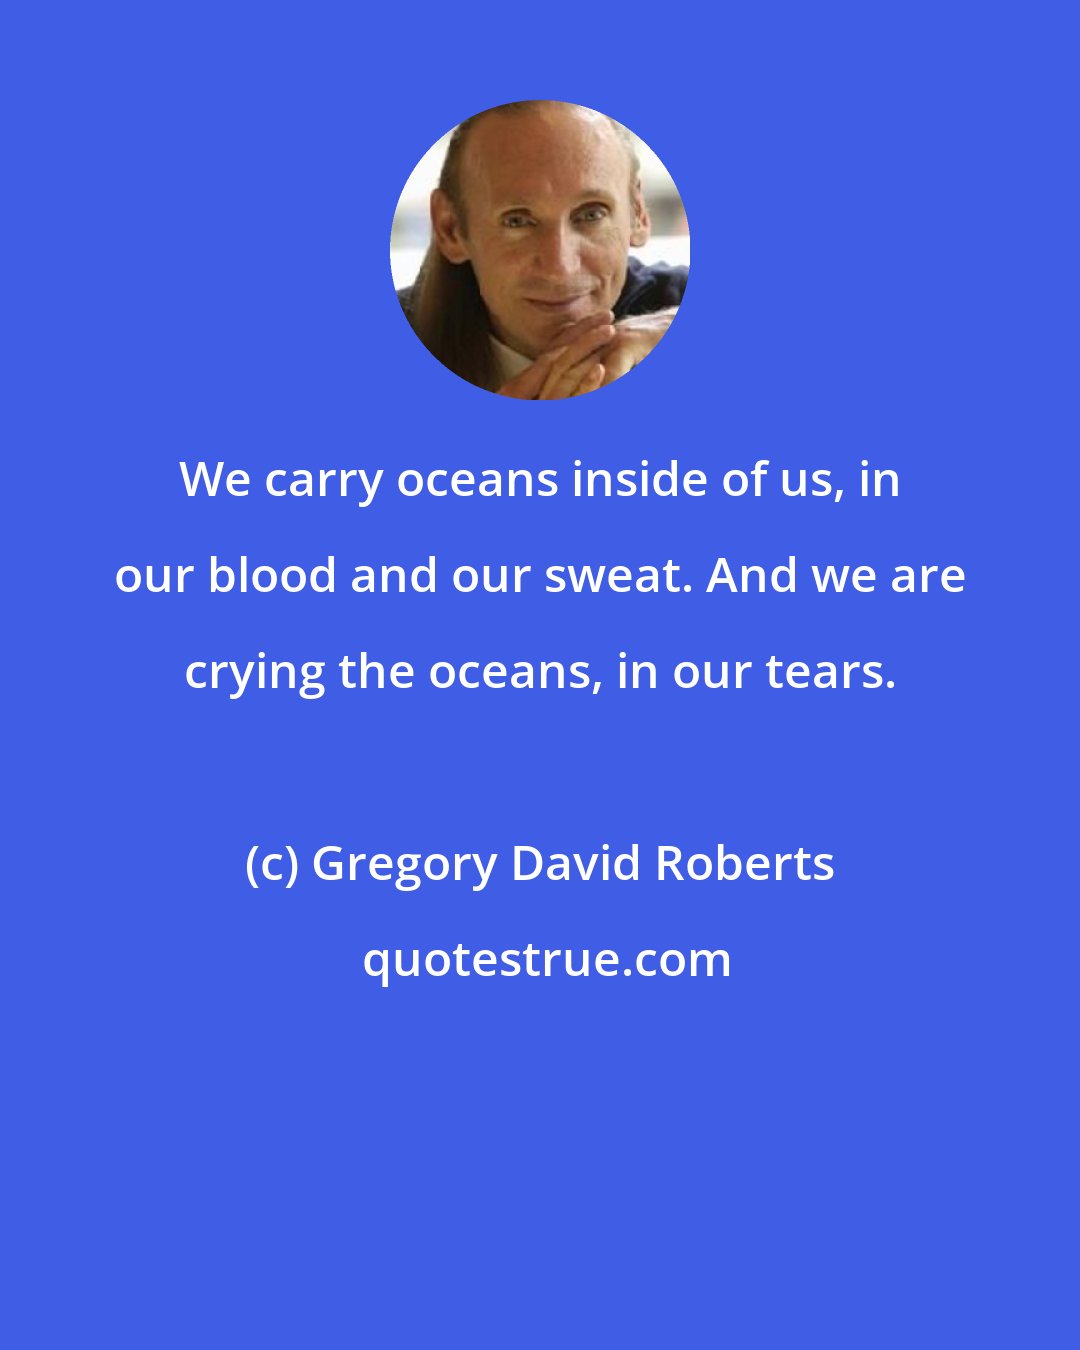 Gregory David Roberts: We carry oceans inside of us, in our blood and our sweat. And we are crying the oceans, in our tears.